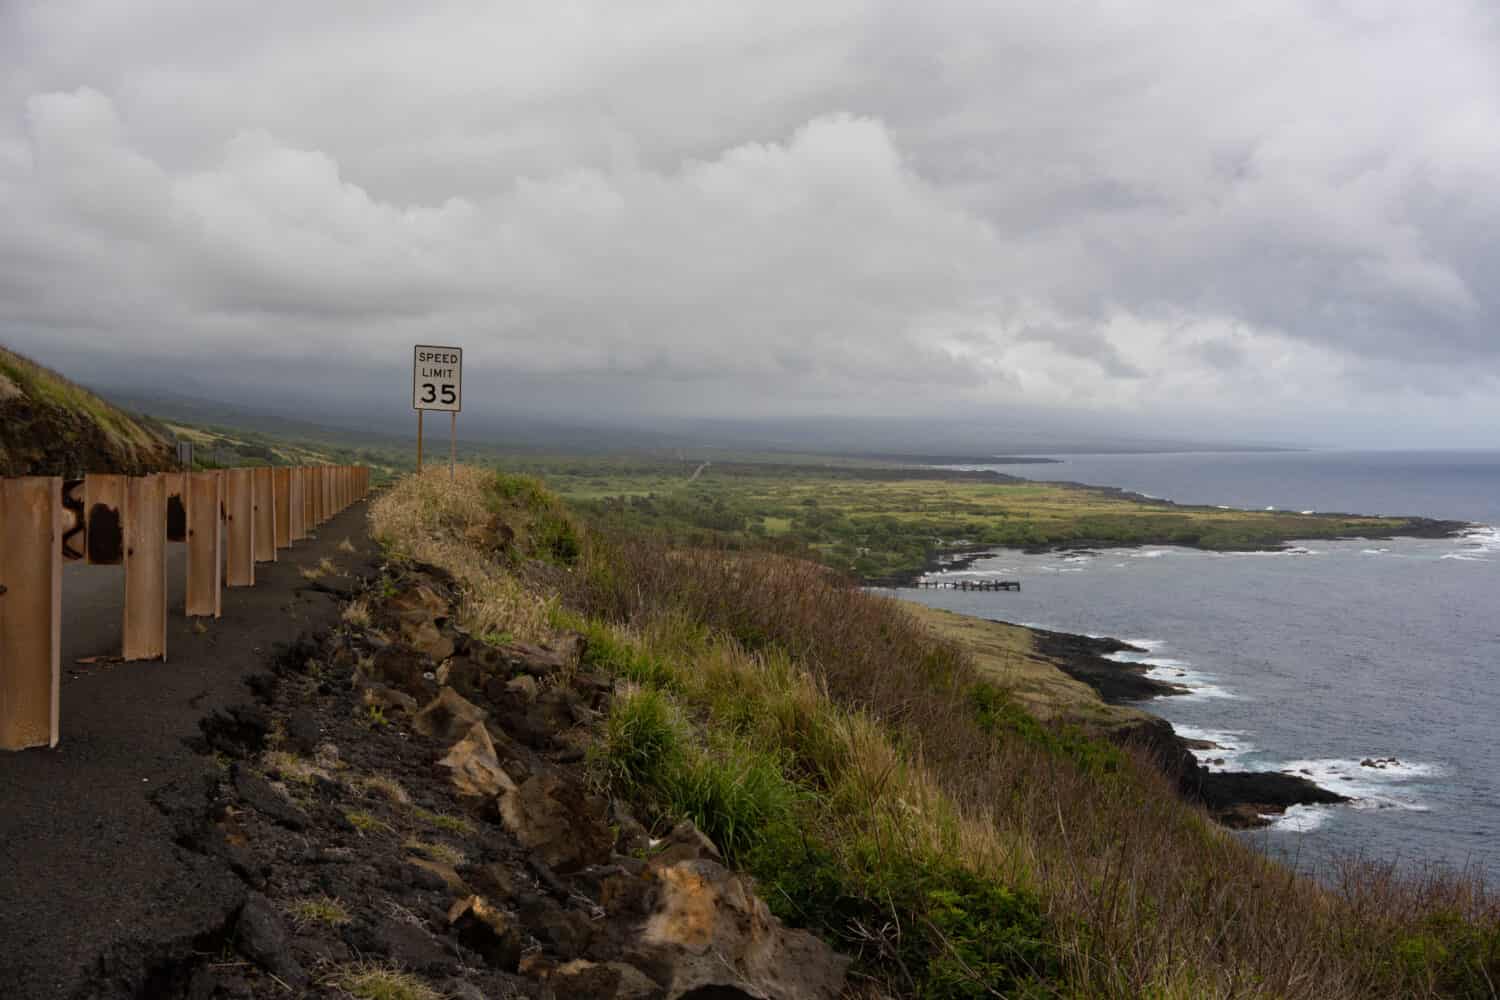 This is the scenic Route 11 in Hawaii. The is part of the Hawaii belt rode. Picture is overlooking the coast and black sand beach as a storm approaches. 